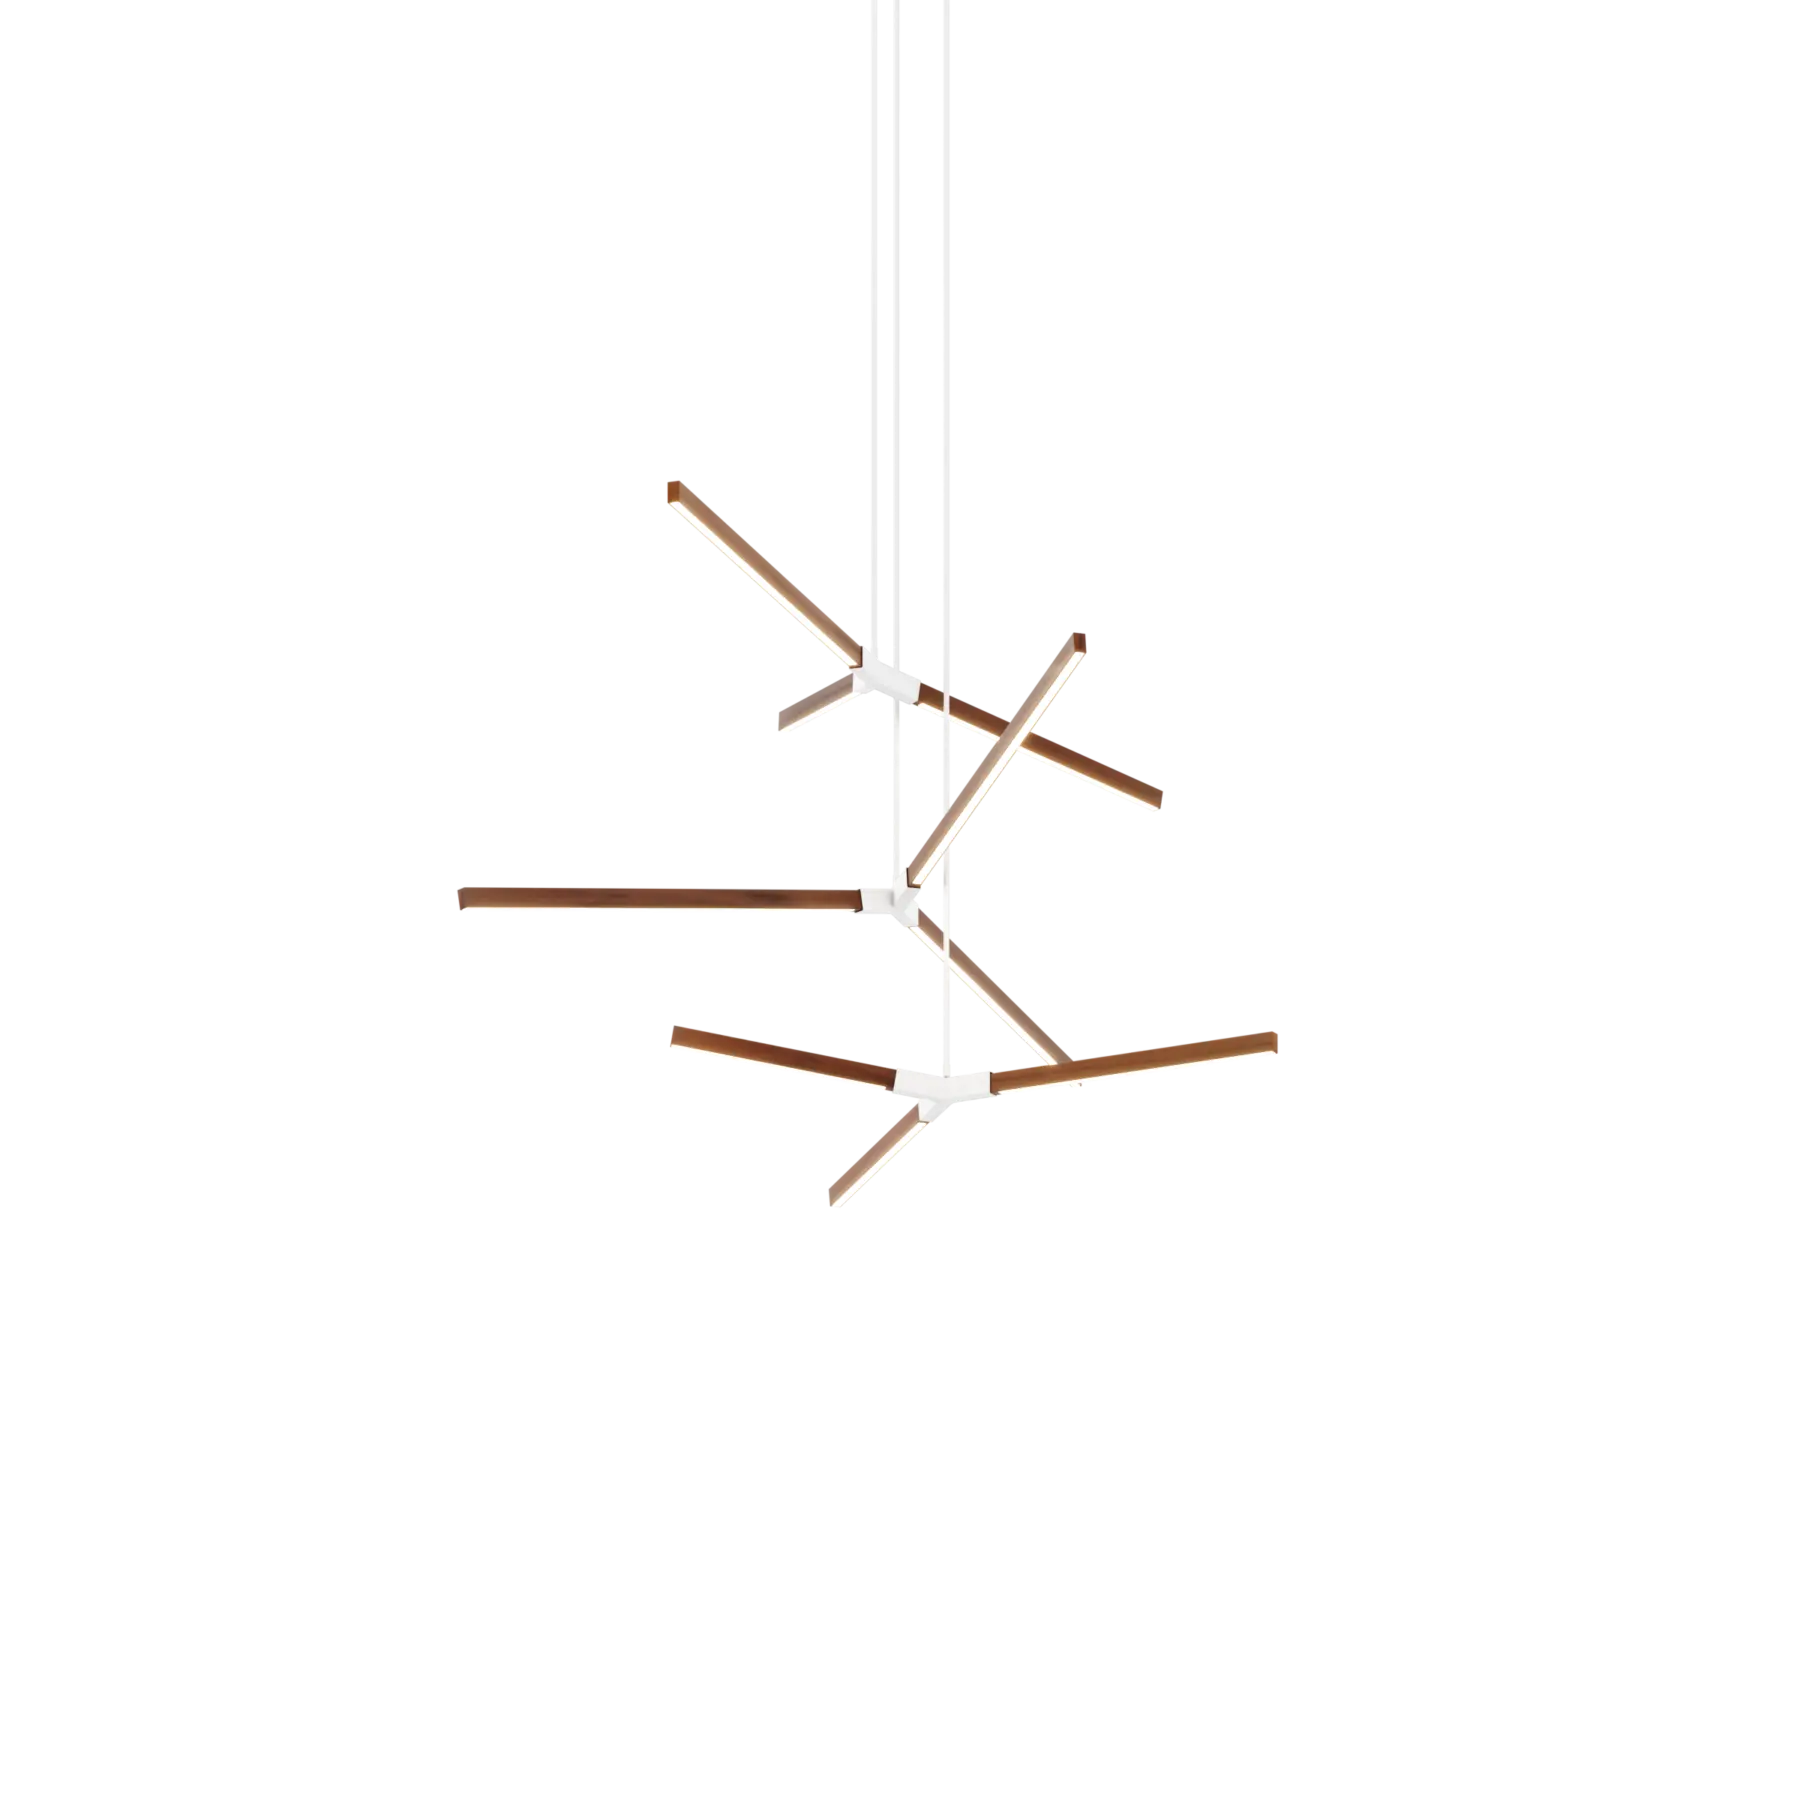 Image of a Stickbulb Multiple Bough lighting fixture. The modern fixture consists of sleek wooden beams with multiple integrated LED bulbs.